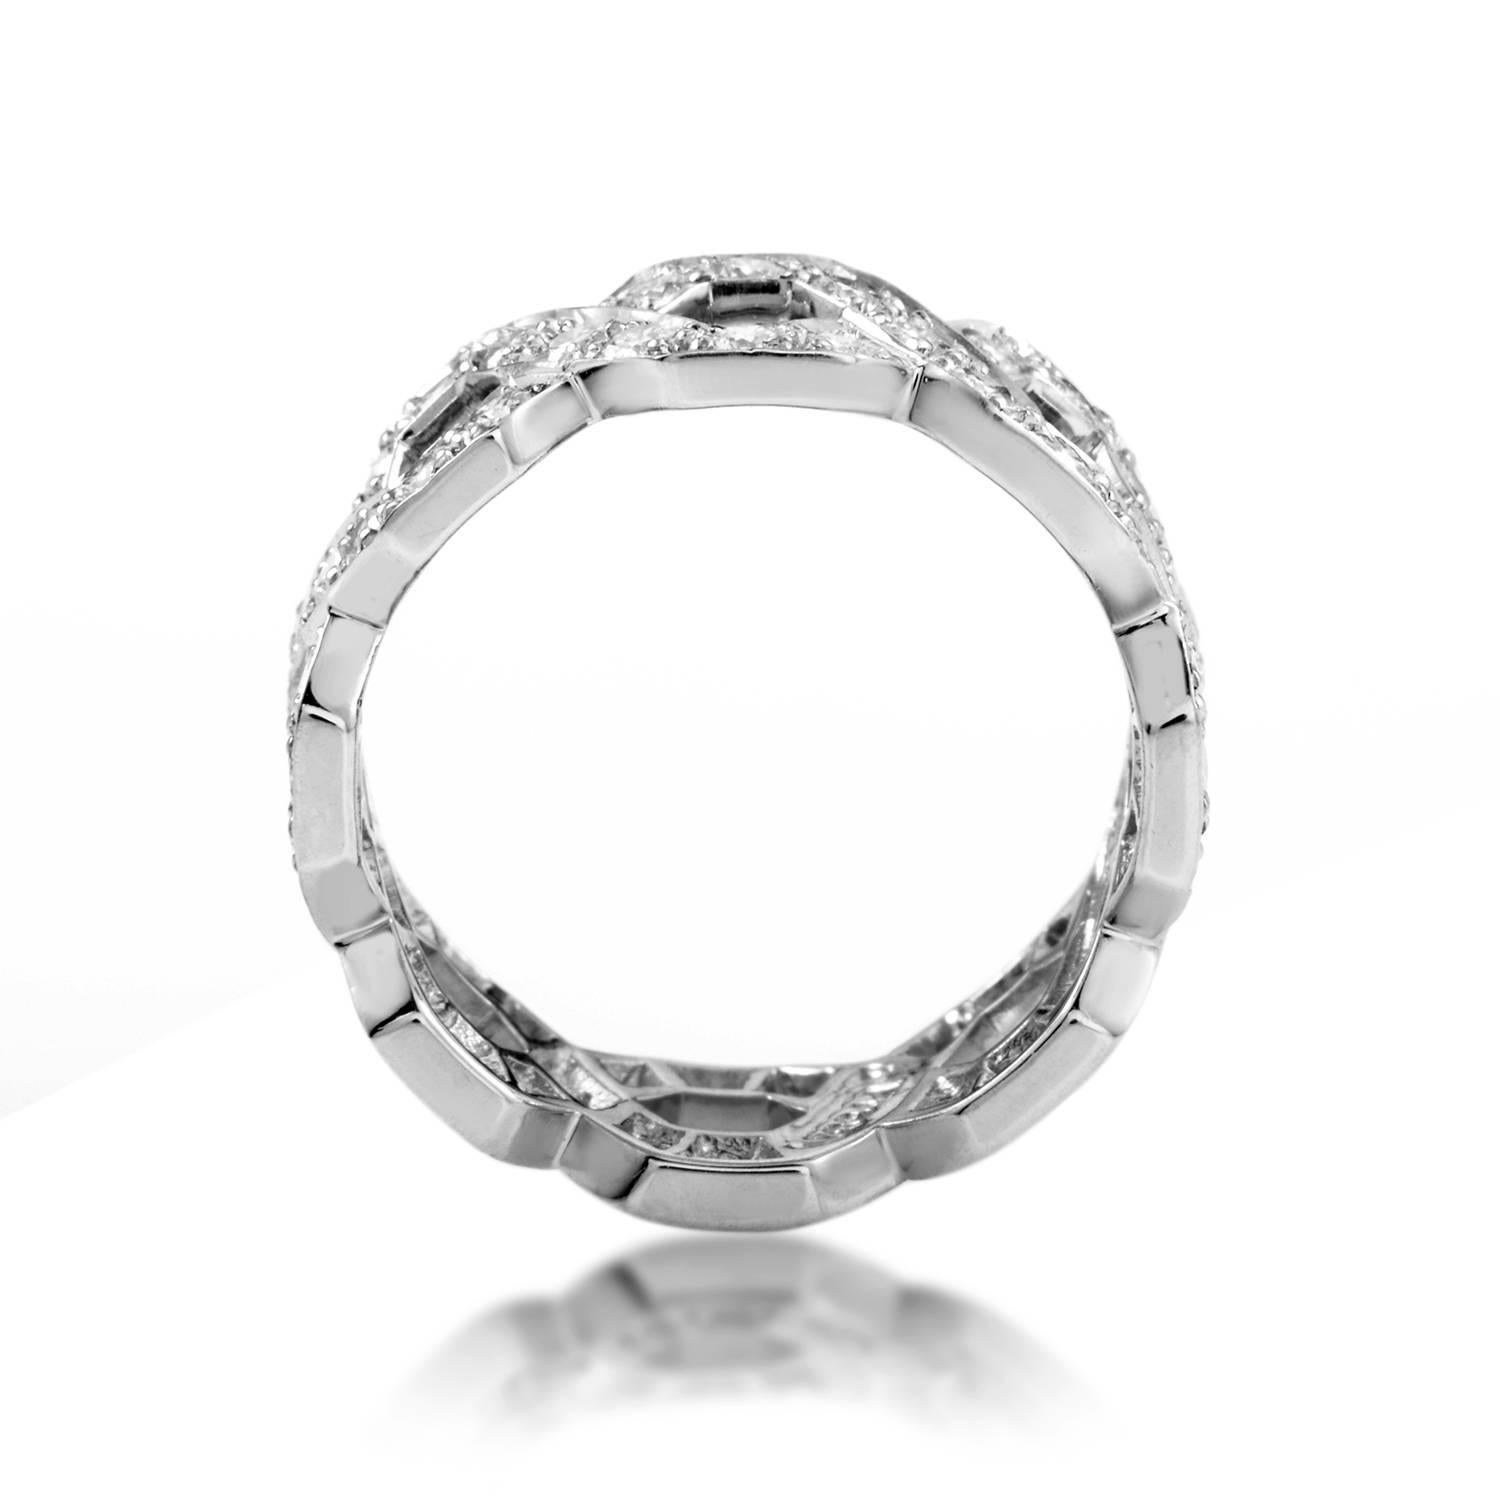 Seemingly comprised of two identical strings of prestigious platinum intertwining to create an intriguing and never-ending pattern, this astonishing wedding band from Tiffany & Co. is an epitome of luxury and style, embellished tastefully with